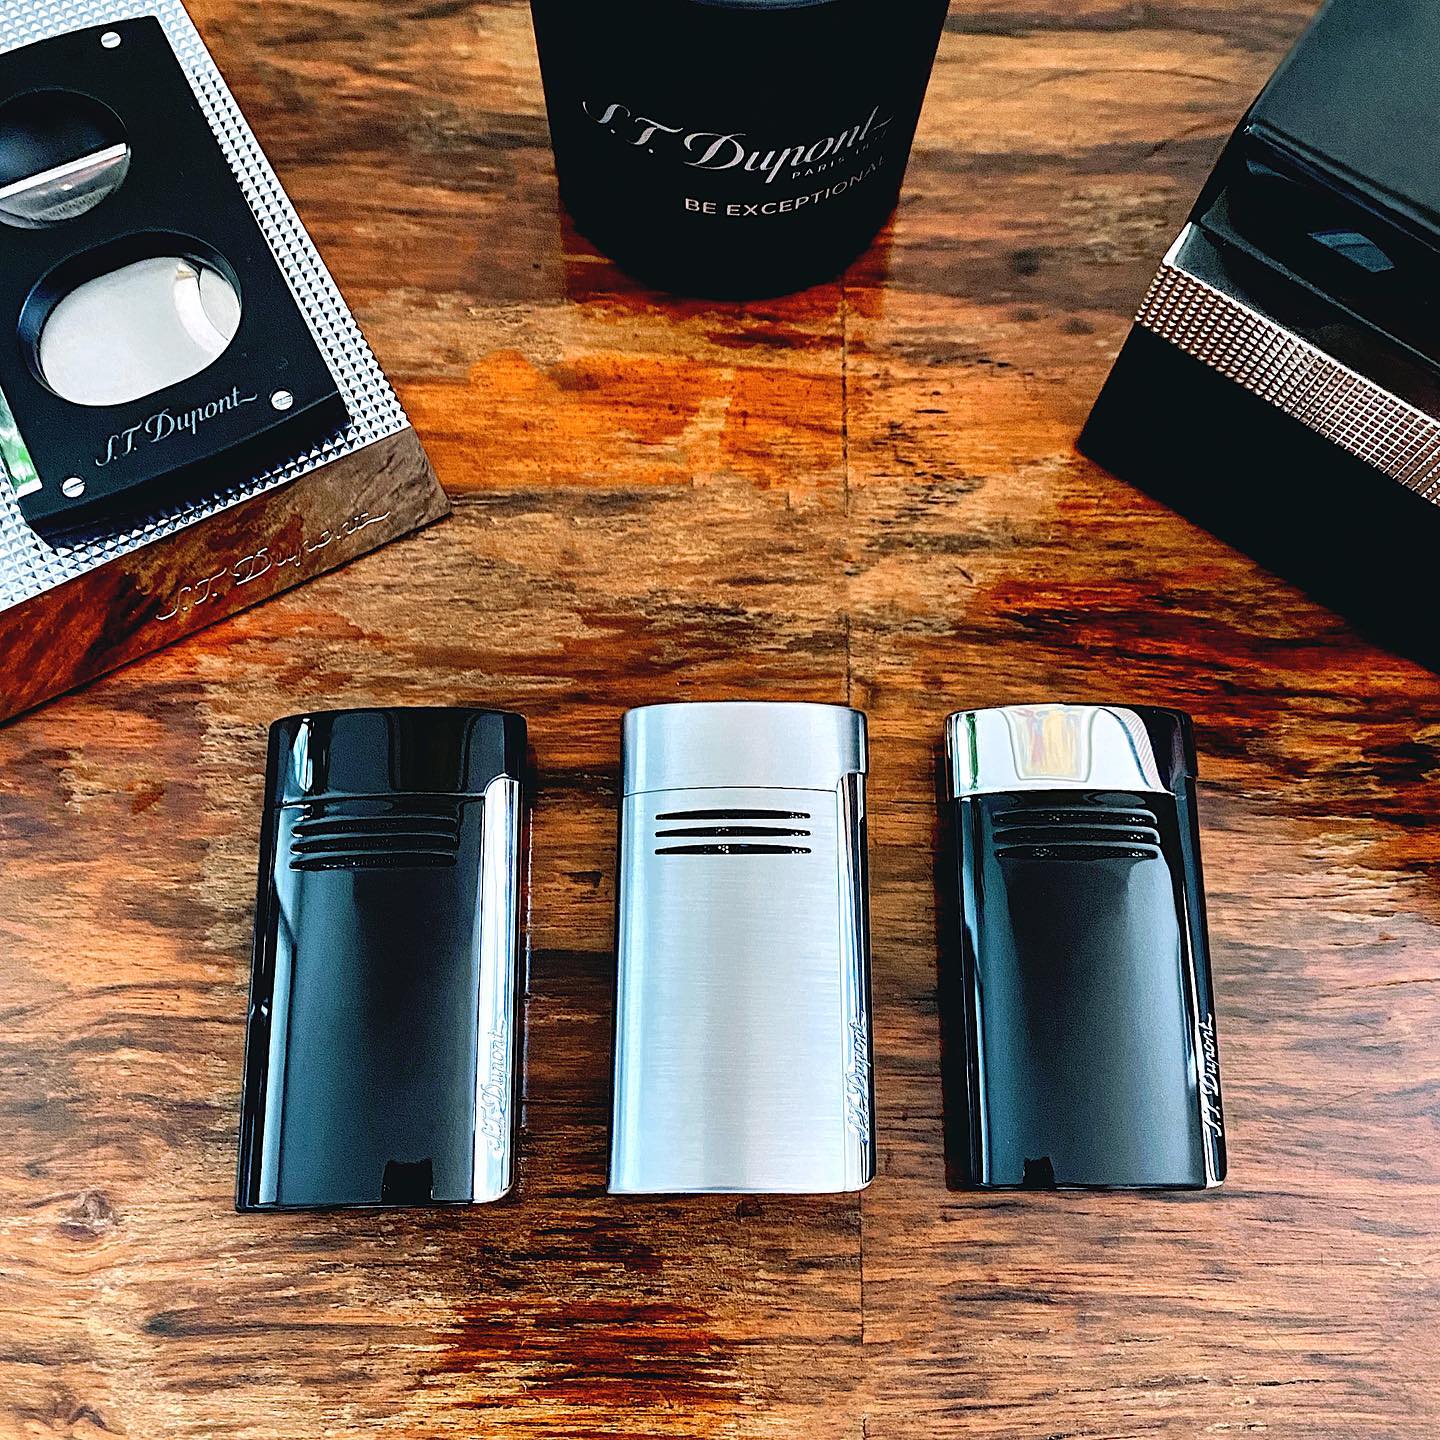 NEW MEGAJET BY S.T. DUPONT New Megajet lighter, extra wide flat flame. Even and perfect lighting, anytime,anywhere. With its pyramidal torch flame and its performance , efficiency and lighting quickness, the new Megajet lighter will satisfy any cigar smokers!...  